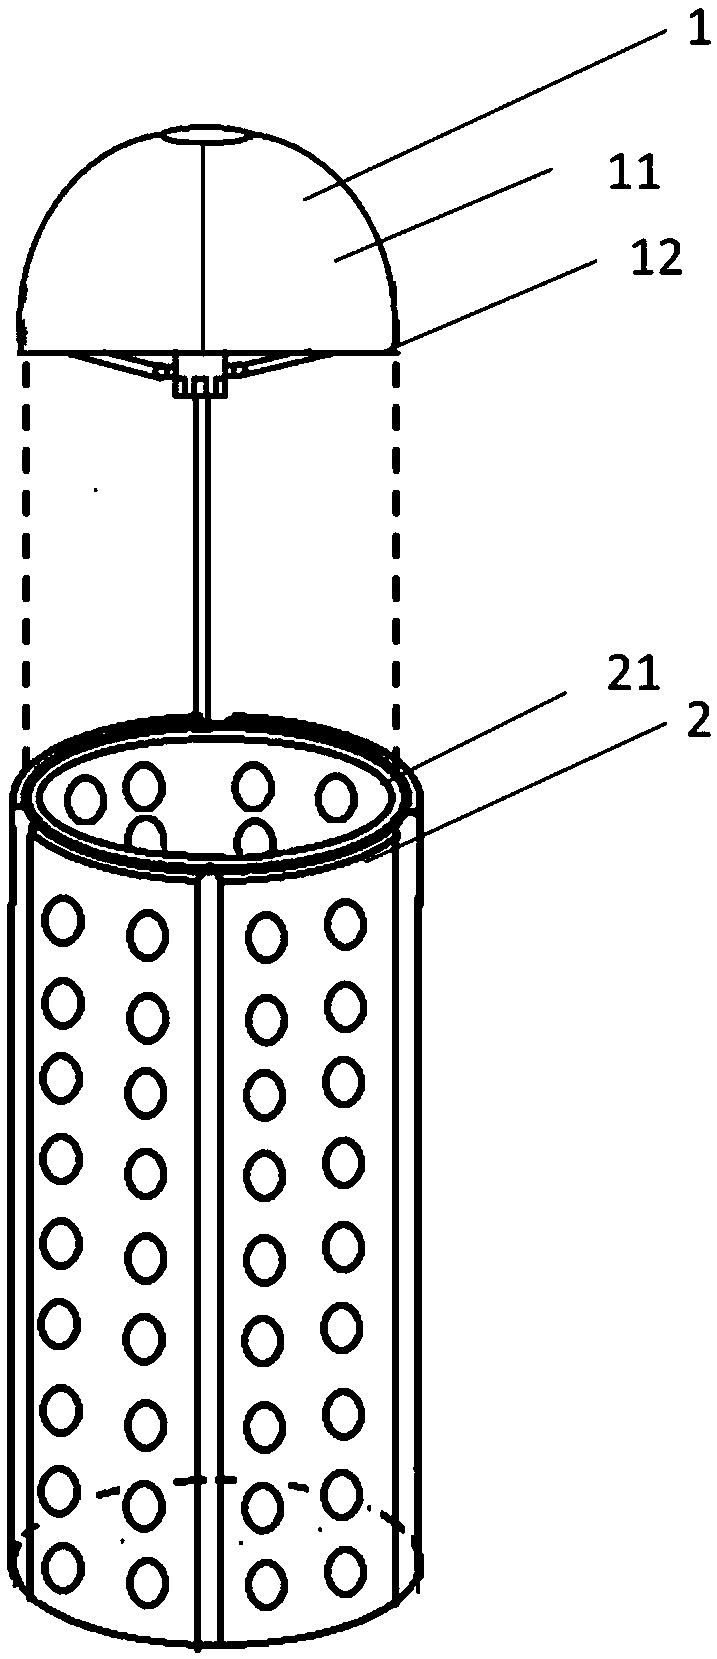 A vaginal mold for vaginal reconstruction and a manufacturing method thereof